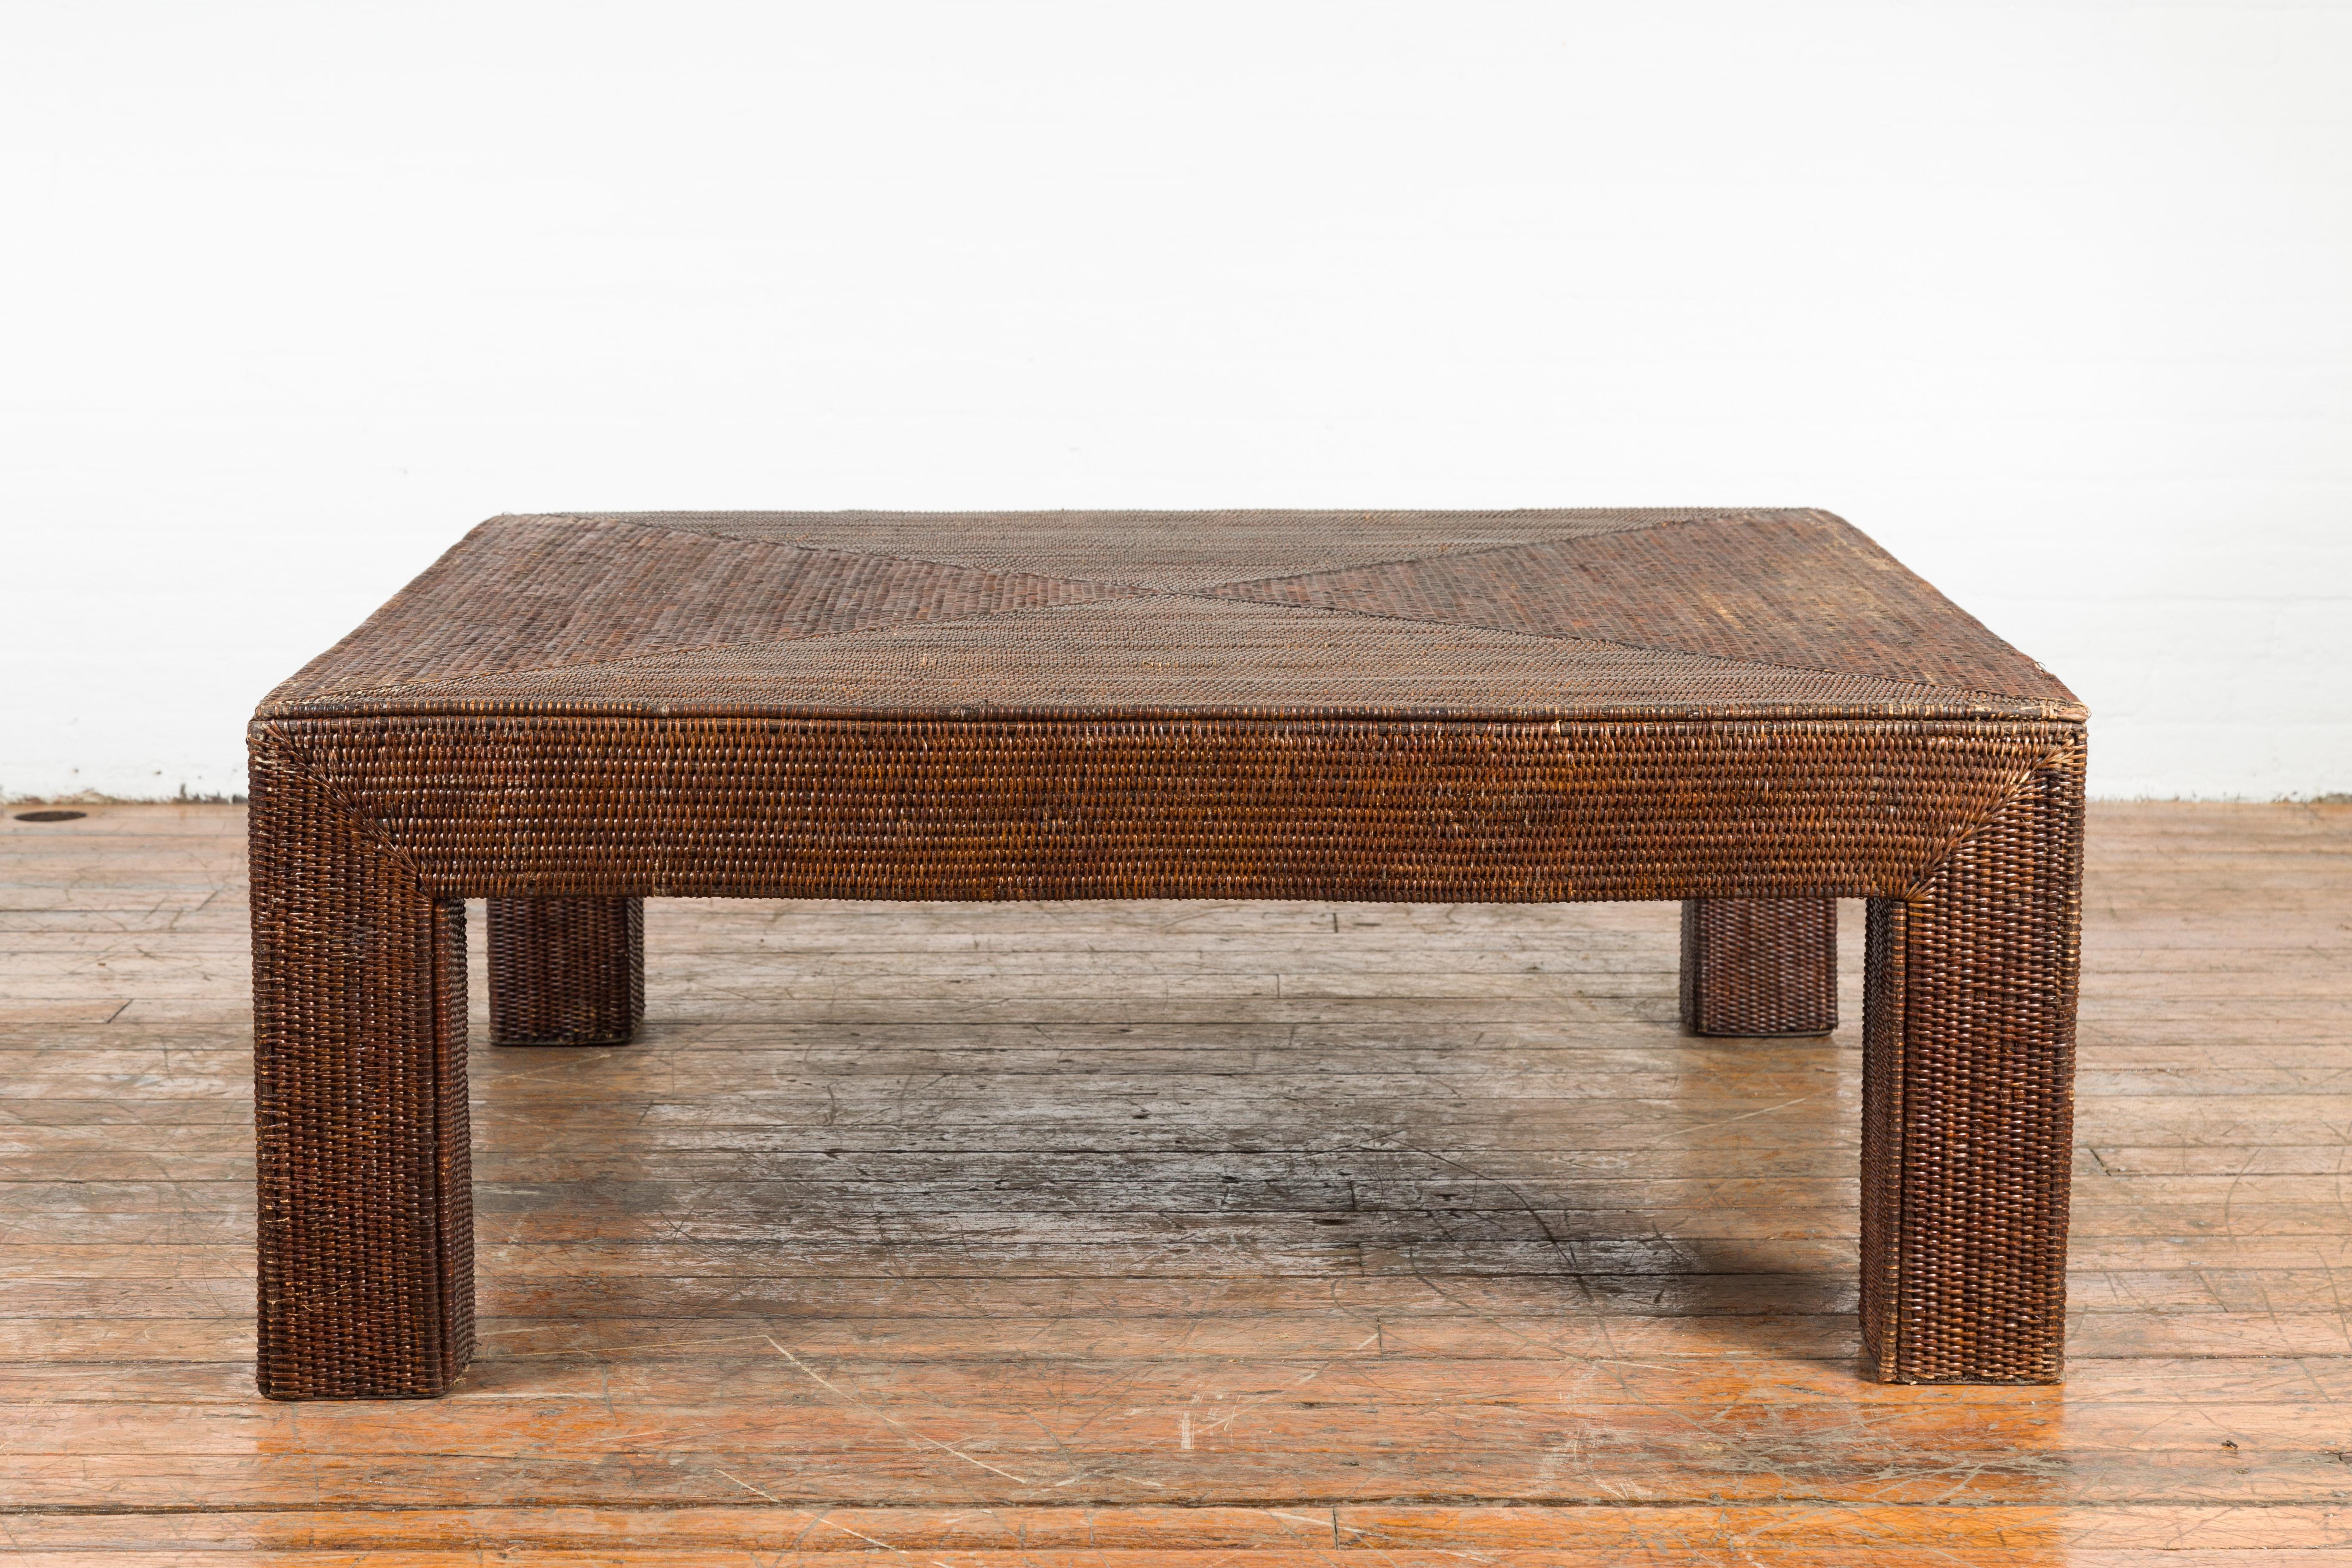 A Burmese vintage dark brown rattan parsons leg coffee table from the mid 20th century, hand-stitched over wood. We currently have several available, priced and sold $3,800 each. Created in Burma during the midcentury period, this Parsons leg coffee